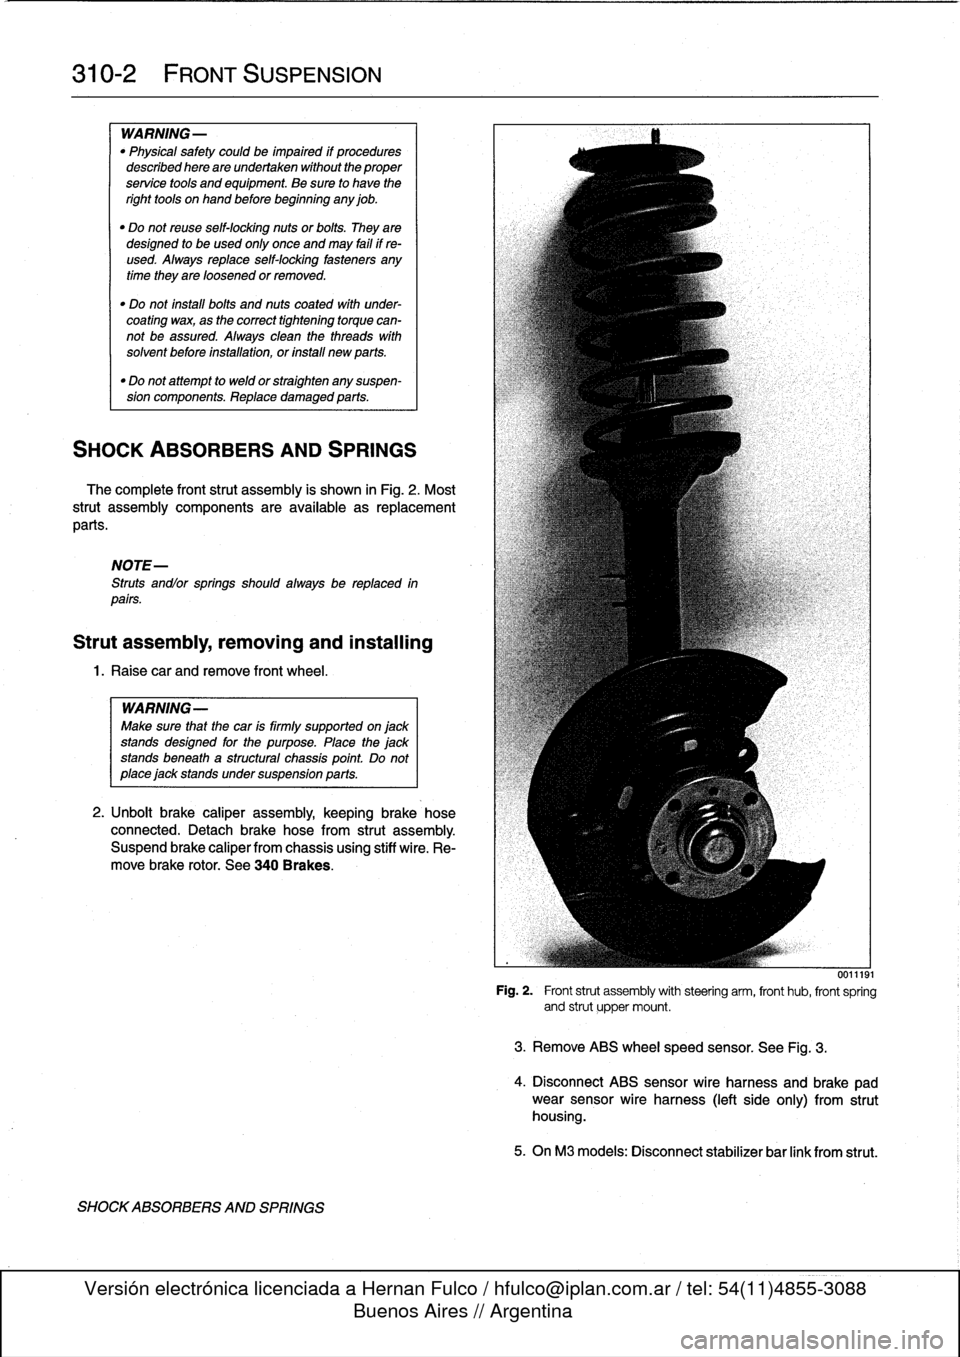 BMW 318i 1998 E36 Owners Manual 
310-2

	

FRONT
SUSPENSION

WARNING-

"
Physical
safety
could
be
impaired
if
procedures
described
here
areundertaken
without
the
proper
service
tools
and
equipment
.
Be
sure
to
have
the
right
tools
o